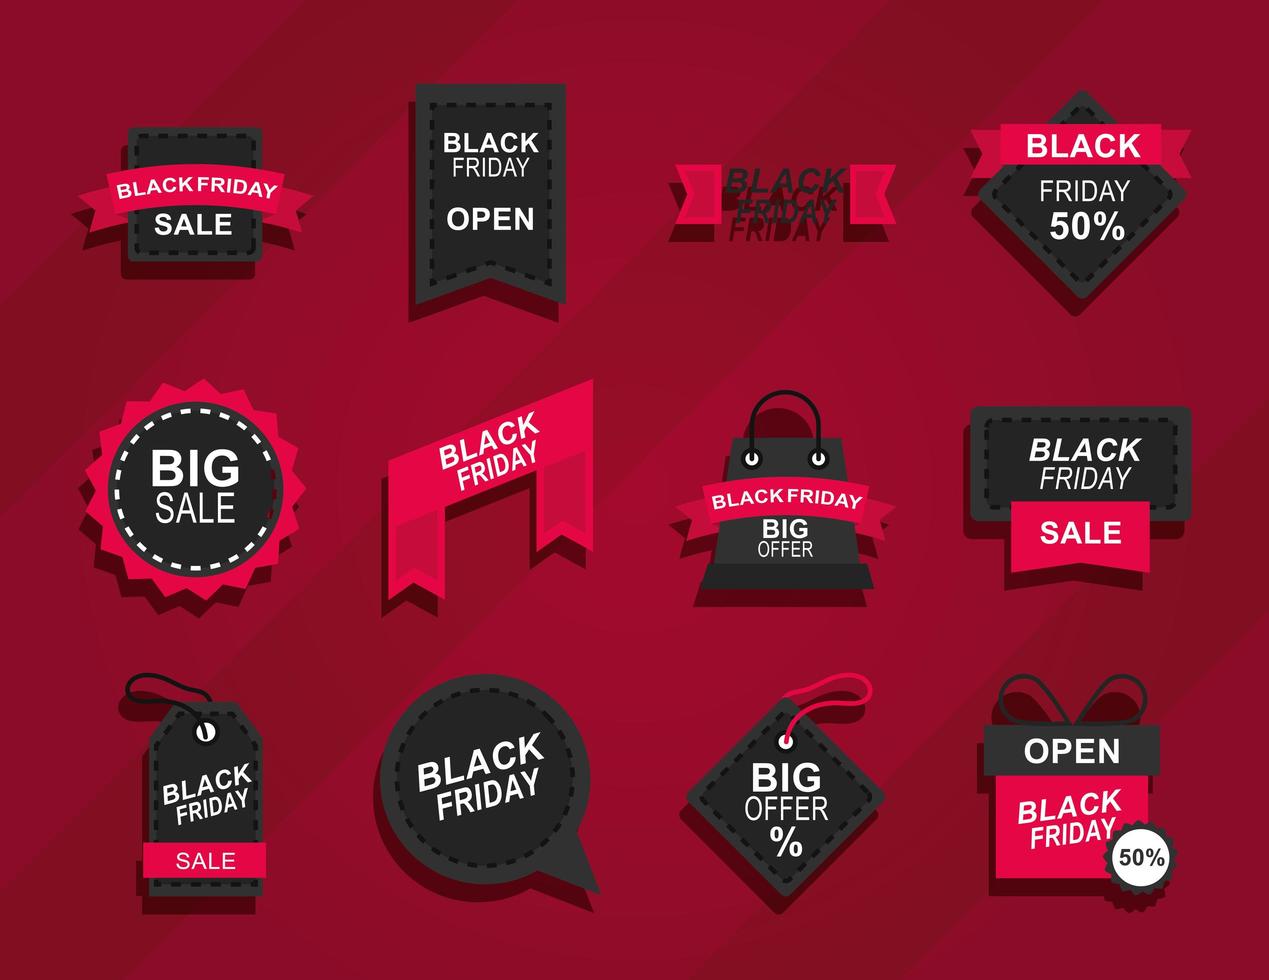 black friday announce season discount offer icons on red background flat style vector